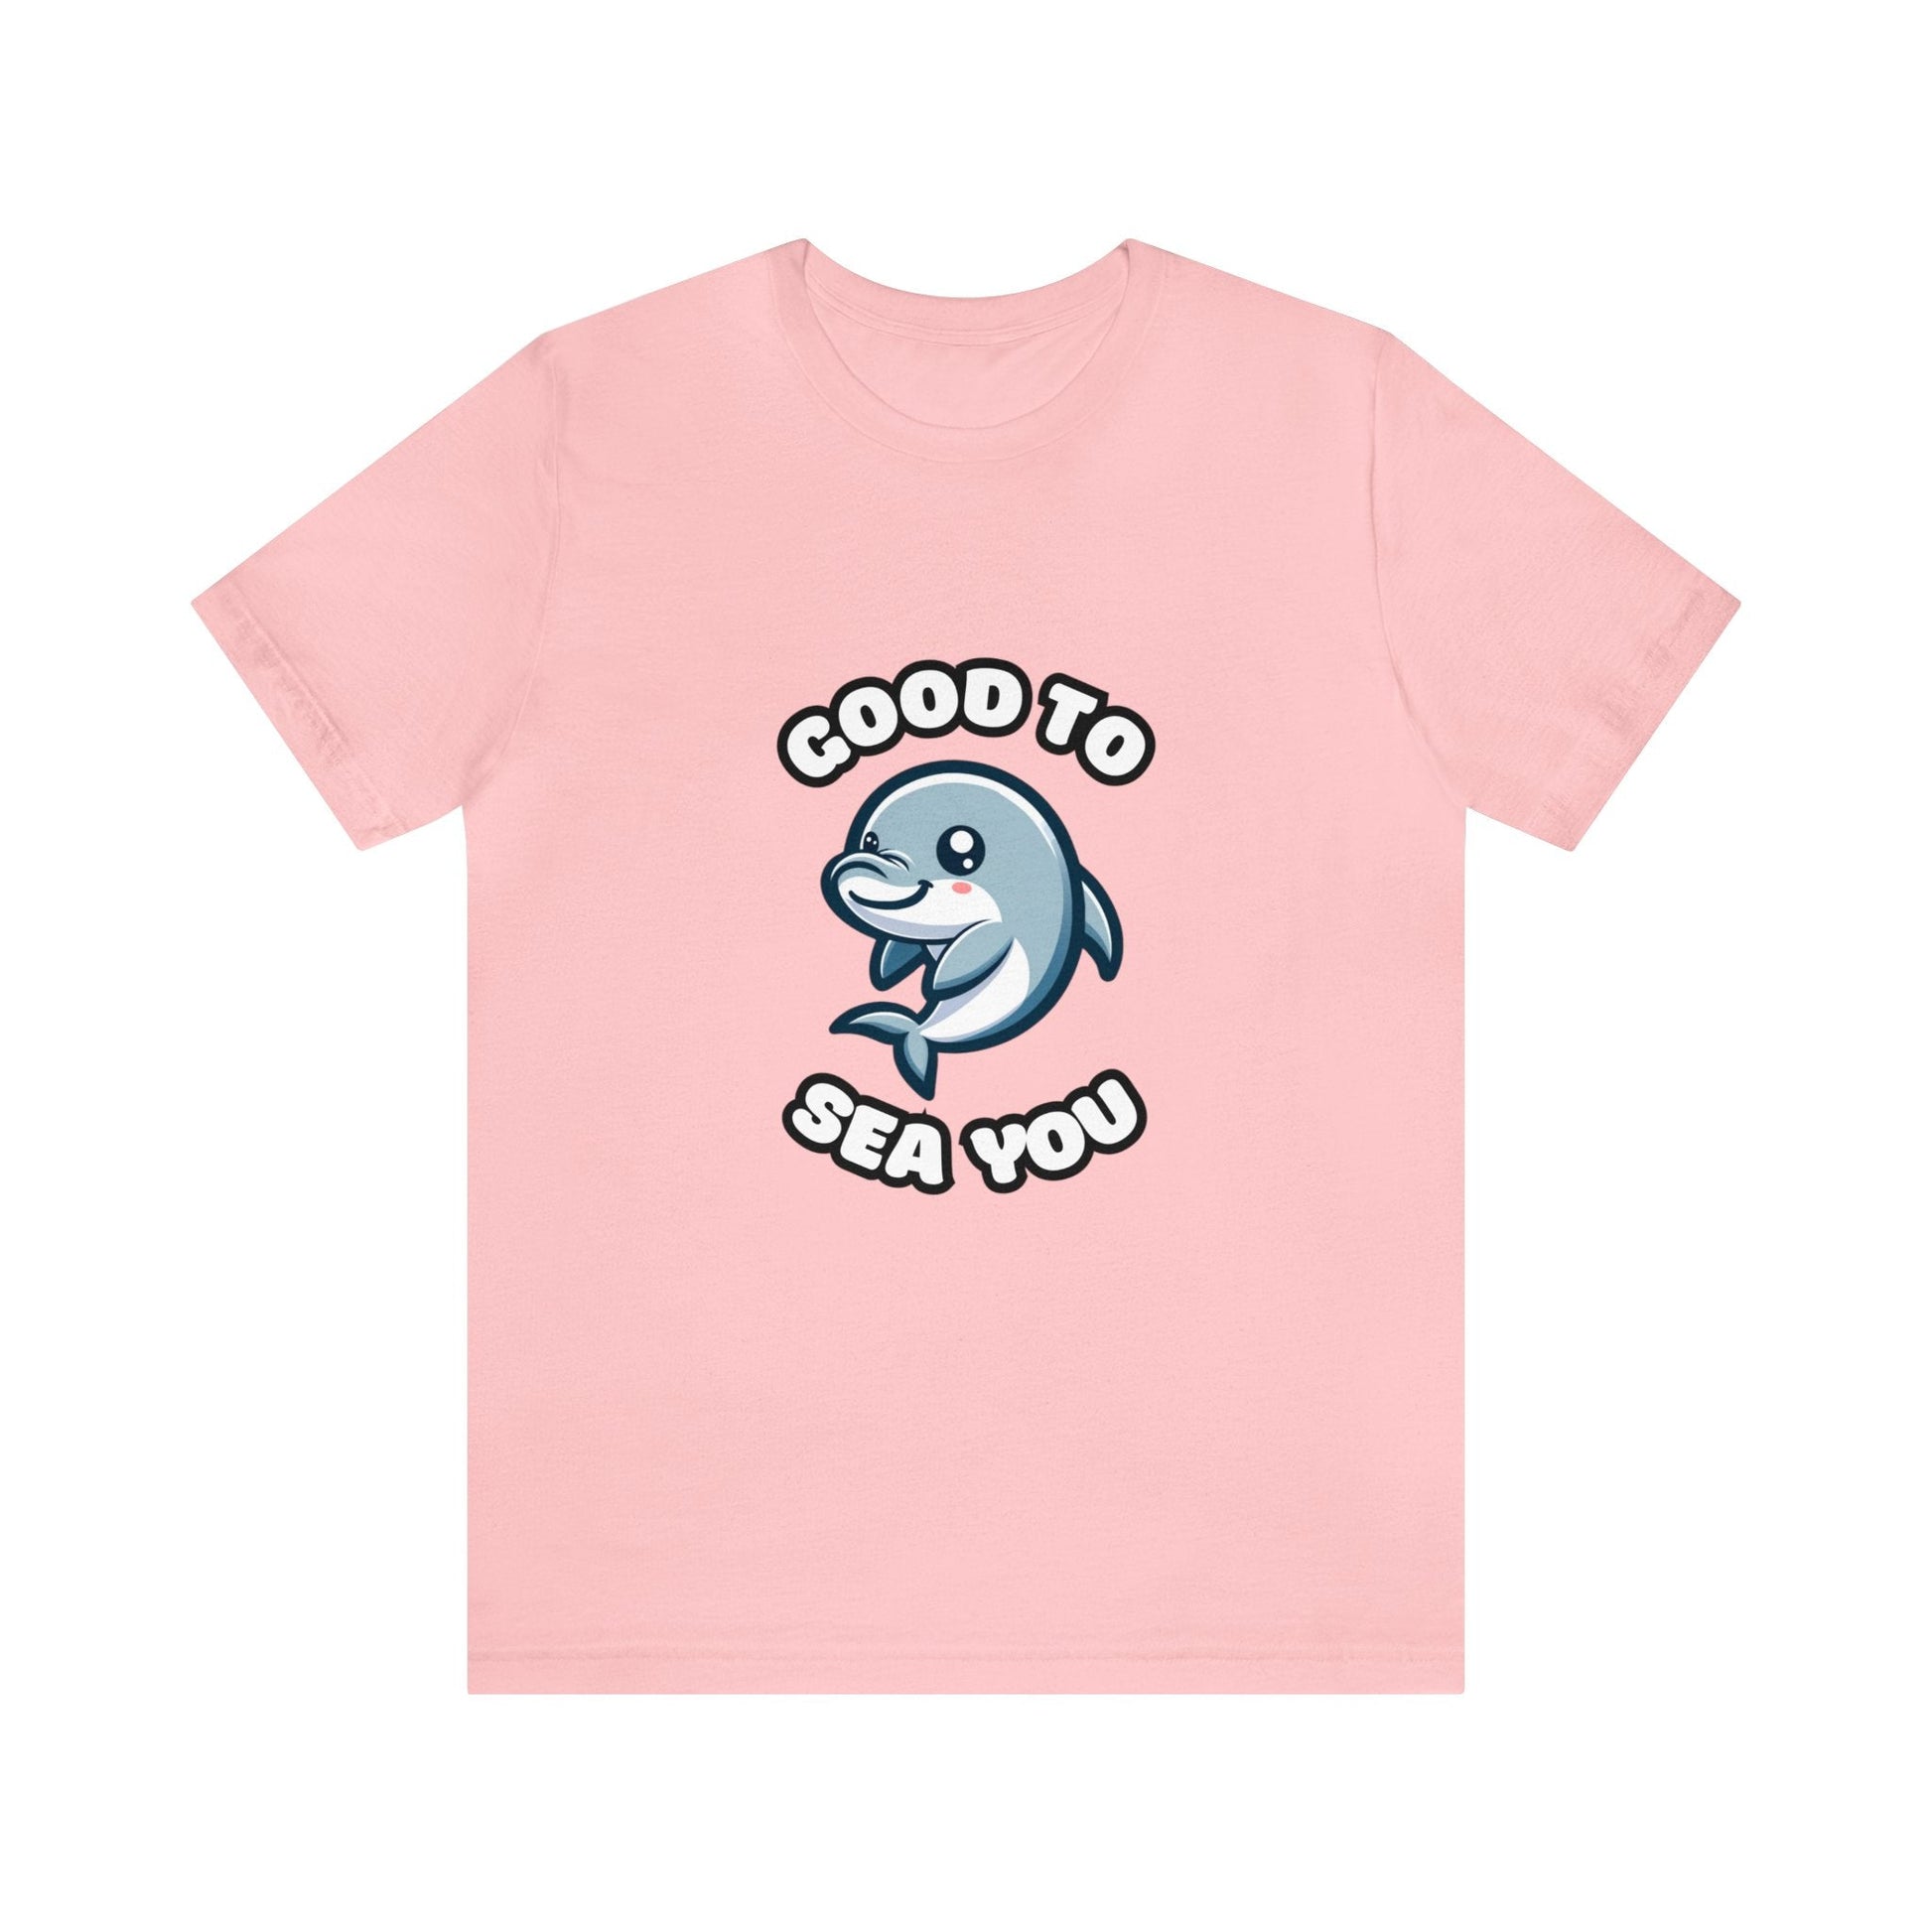 US - Good To Sea You - Dolphin T-shirt Pink / XS